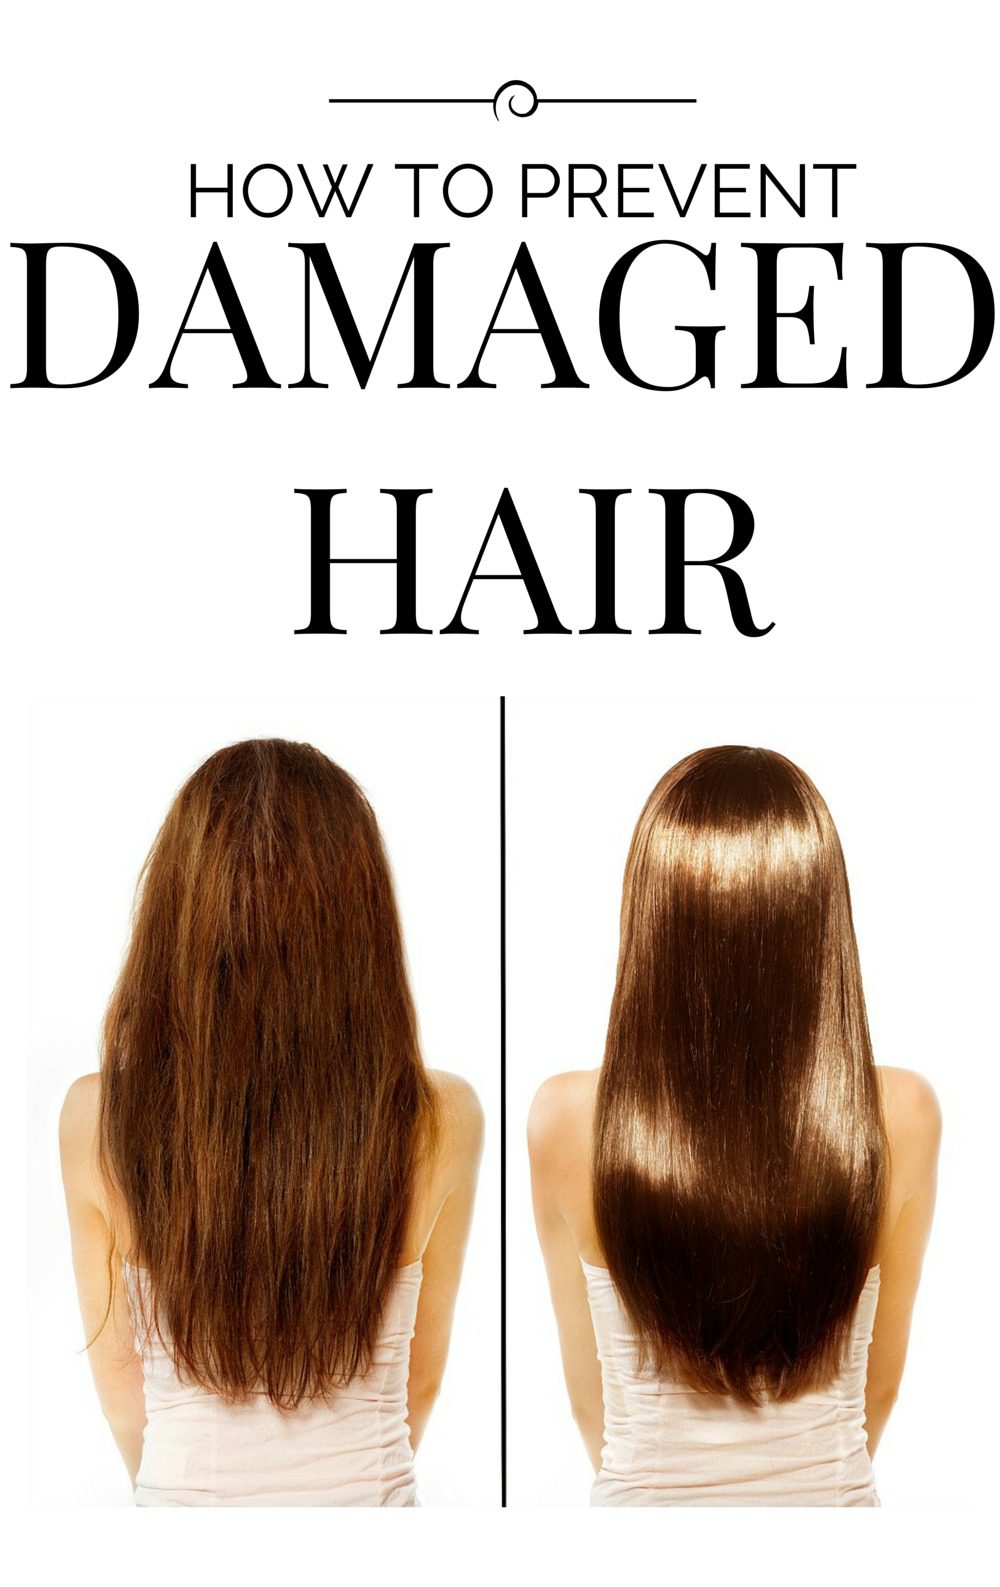 HOW TO PREVENT DAMAGED HAIR